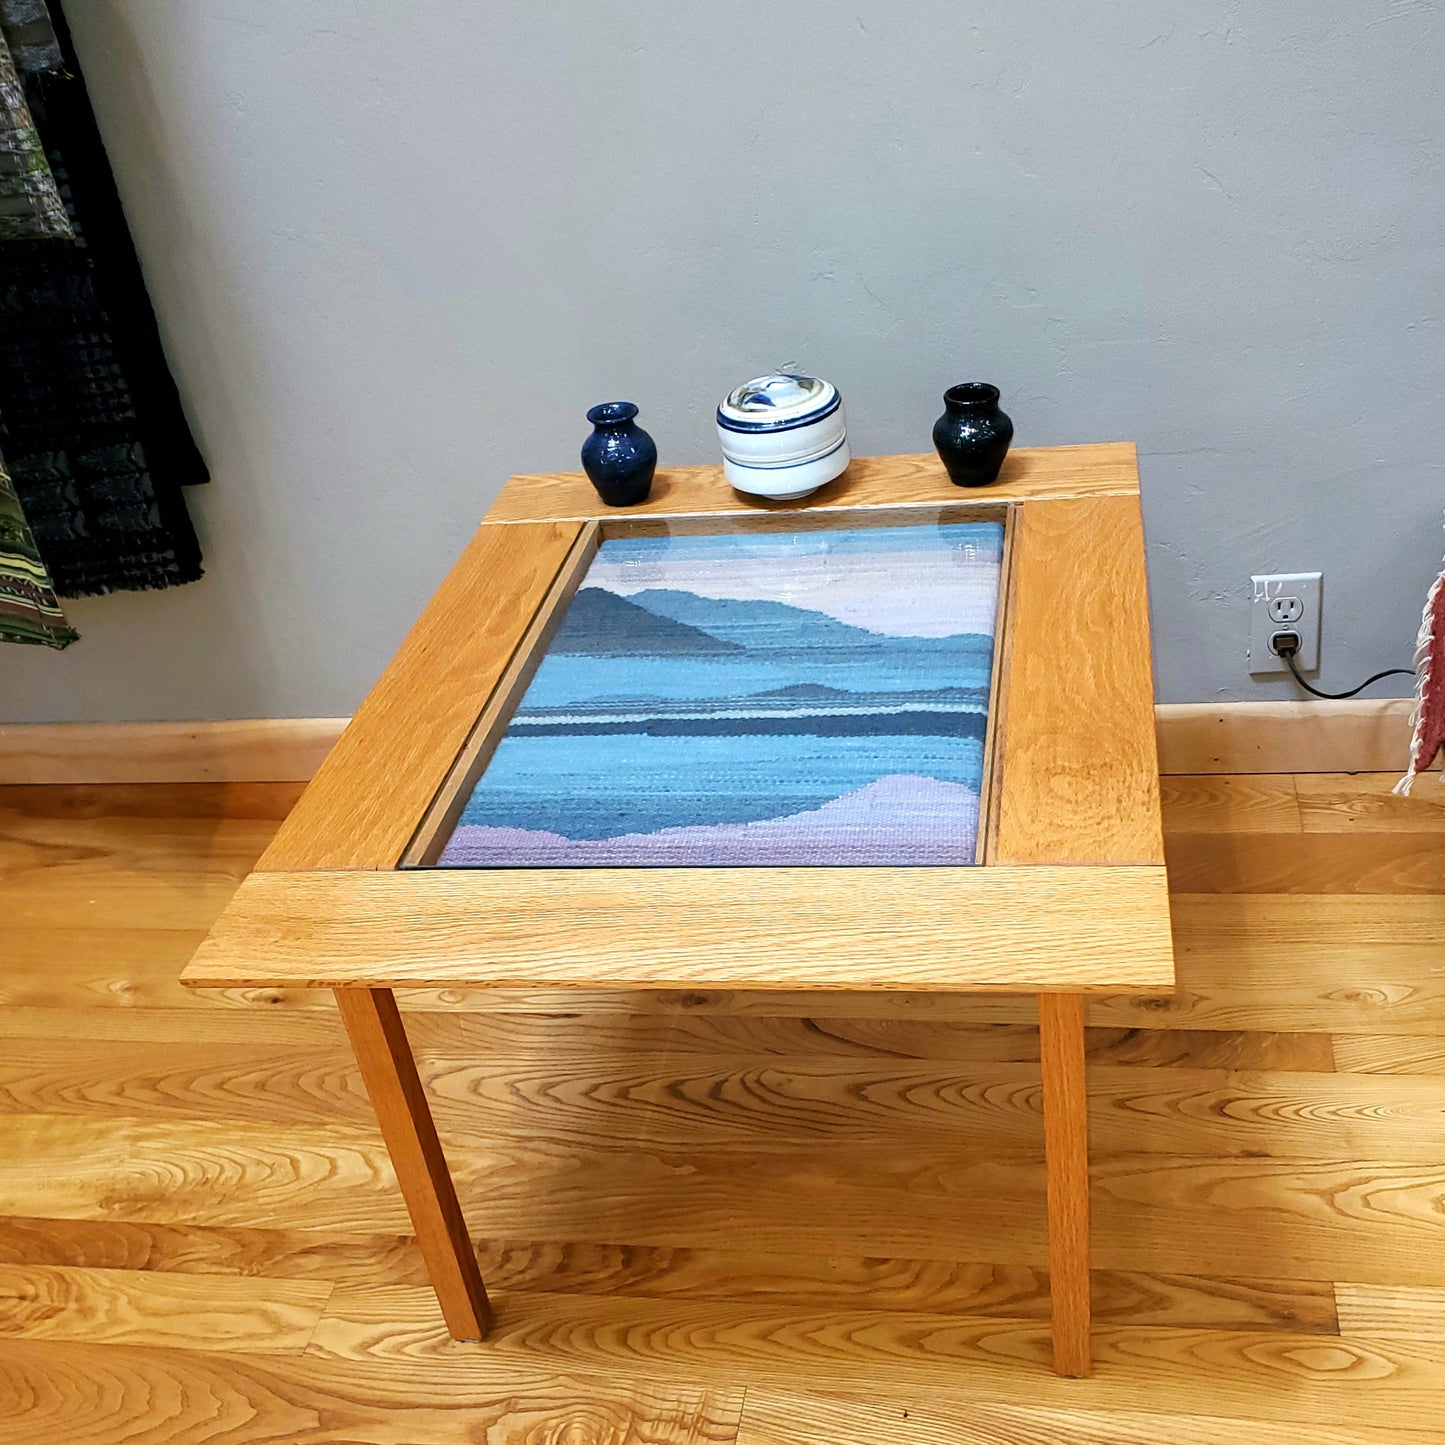 Water Reflection Cocktail Table | Art Galleries in Door County | Furniture Made by Door County Artists | SALE ITEM